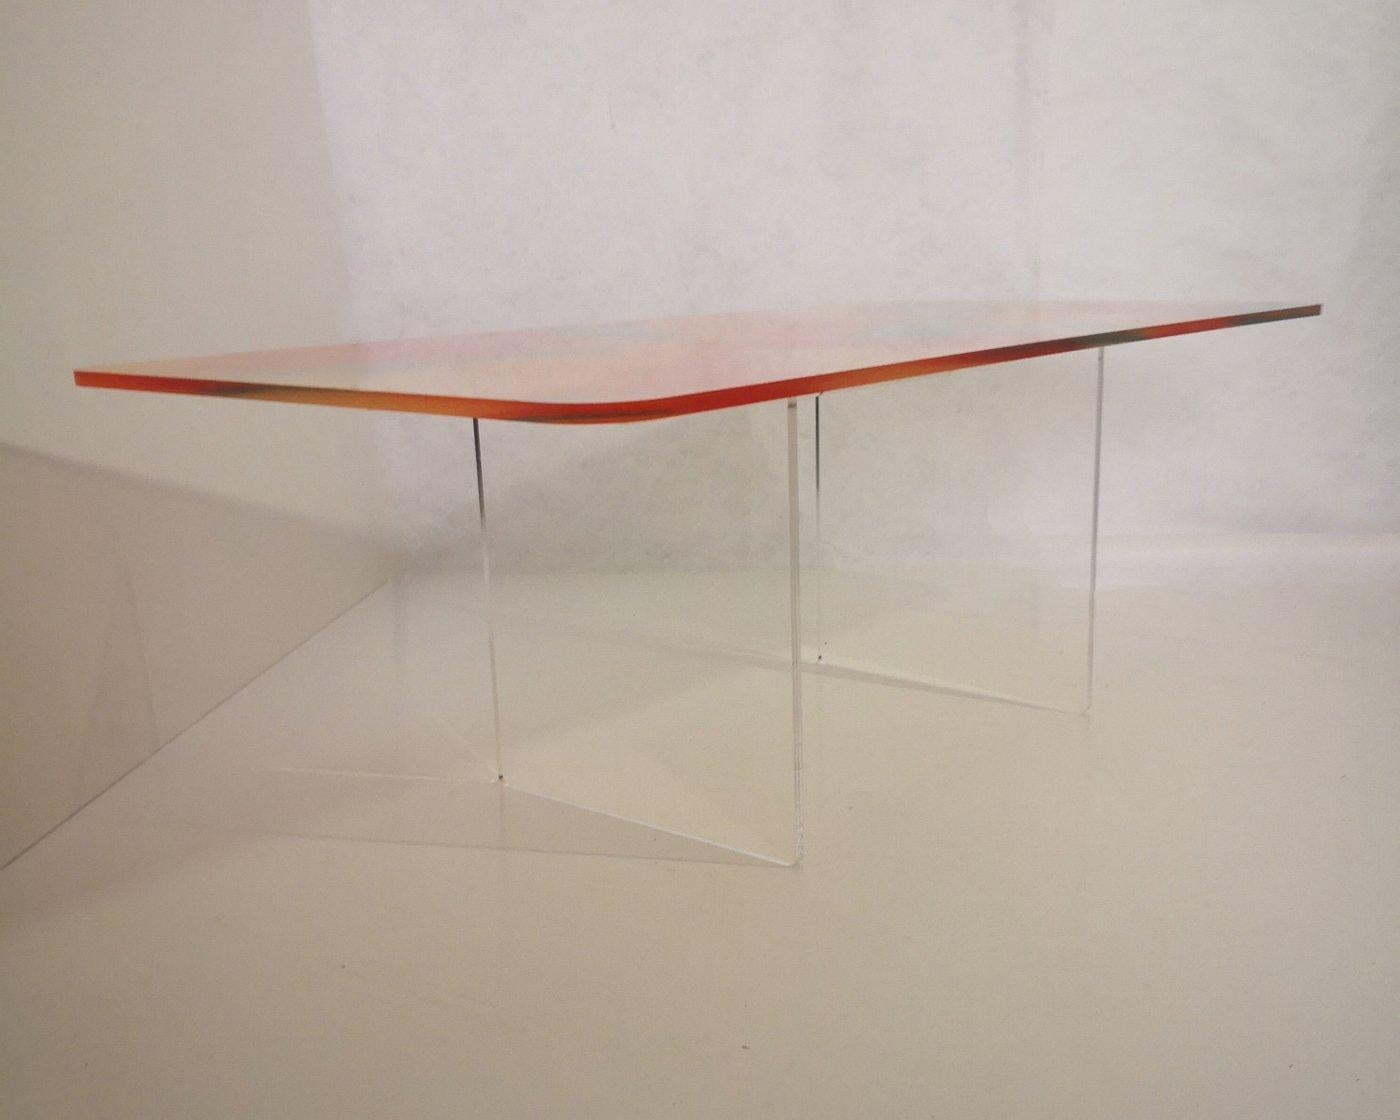 Coffee table, handmade in acrylic with fabric inserted inside.
Thickness 12mm. Brand new technology for inserting the fabric inside the acrylic after being digitally printed.